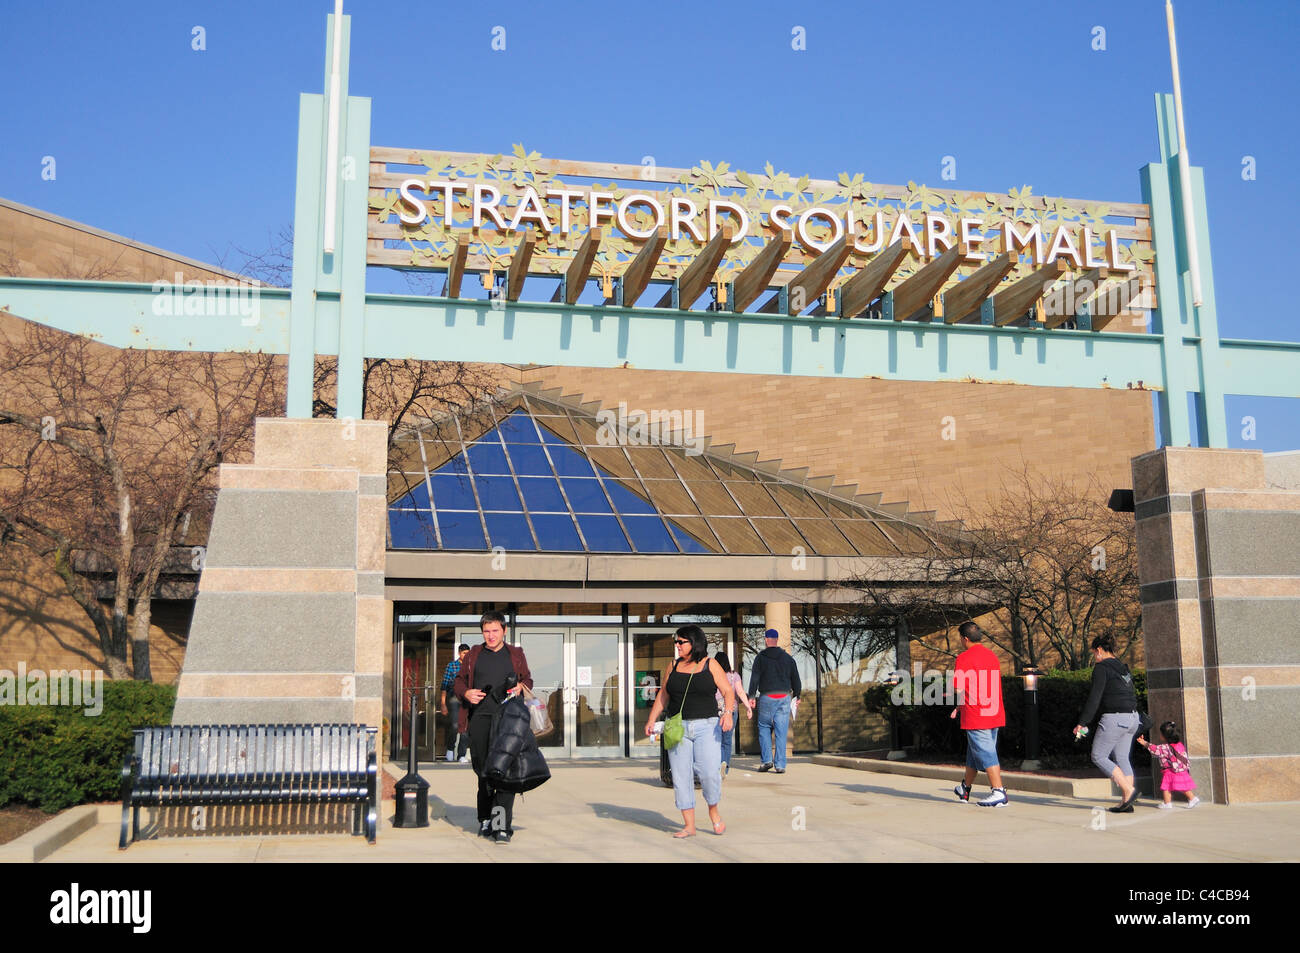 Shoppers entering and leaving a typical American shopping mall  Stratford Square Mall, Bloomingdale, Illinois Stock Photo